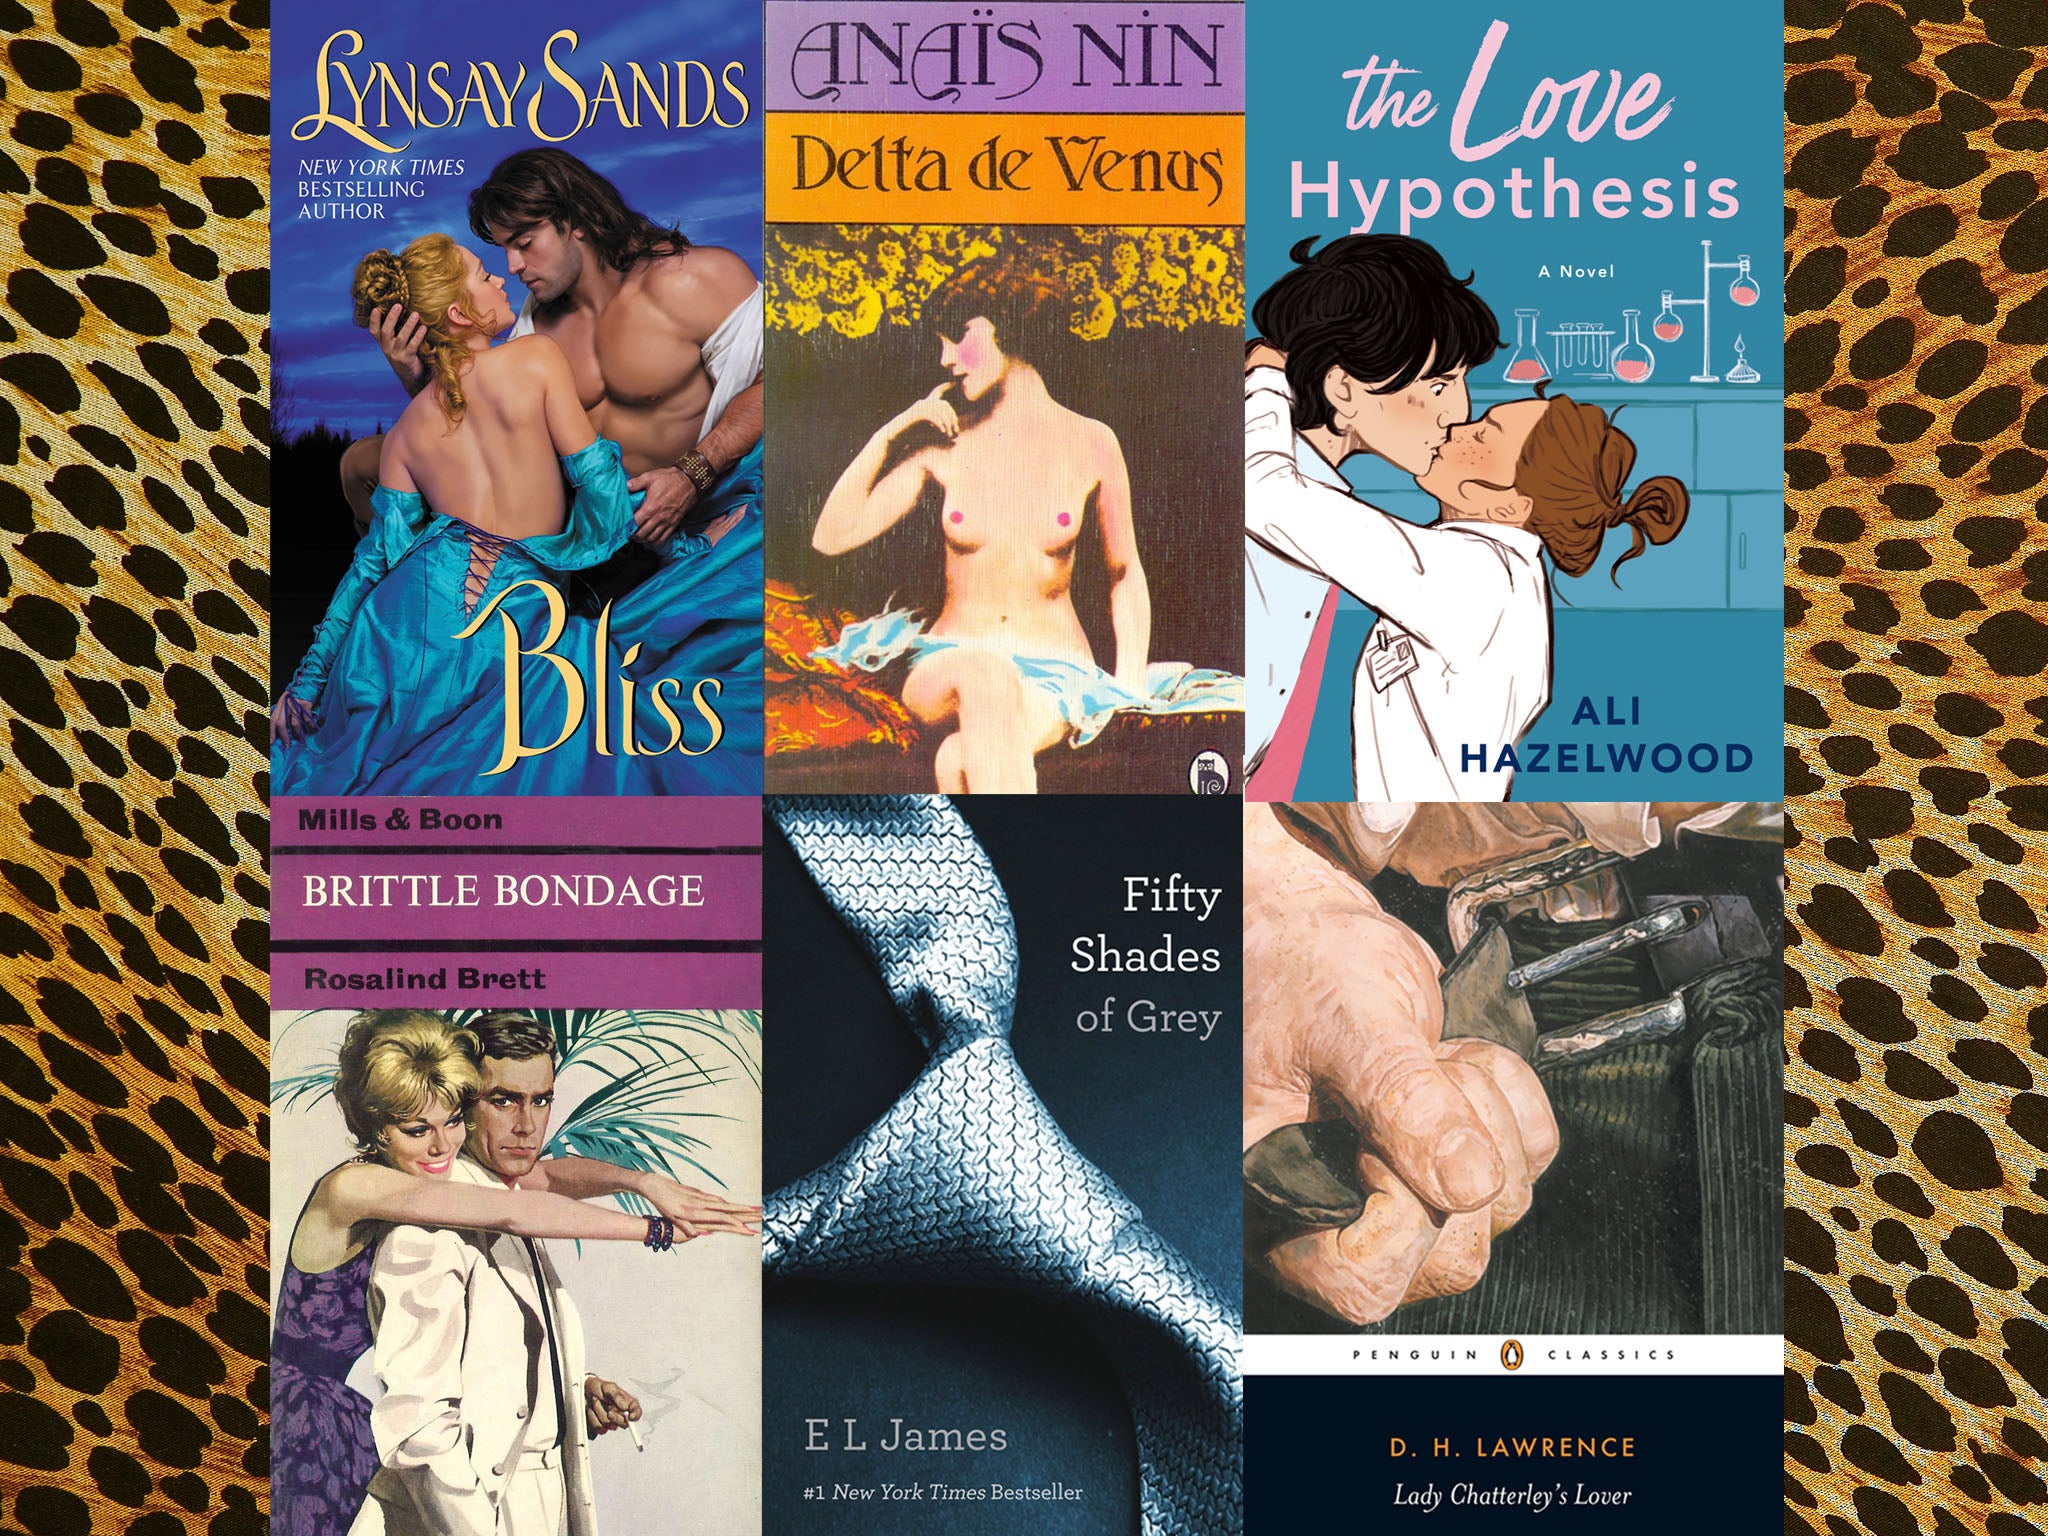 I Hypothesis My Mom For Sex - Smutty novels are blowing up BookTok â€“ but why are their covers so  discreet? | The Independent